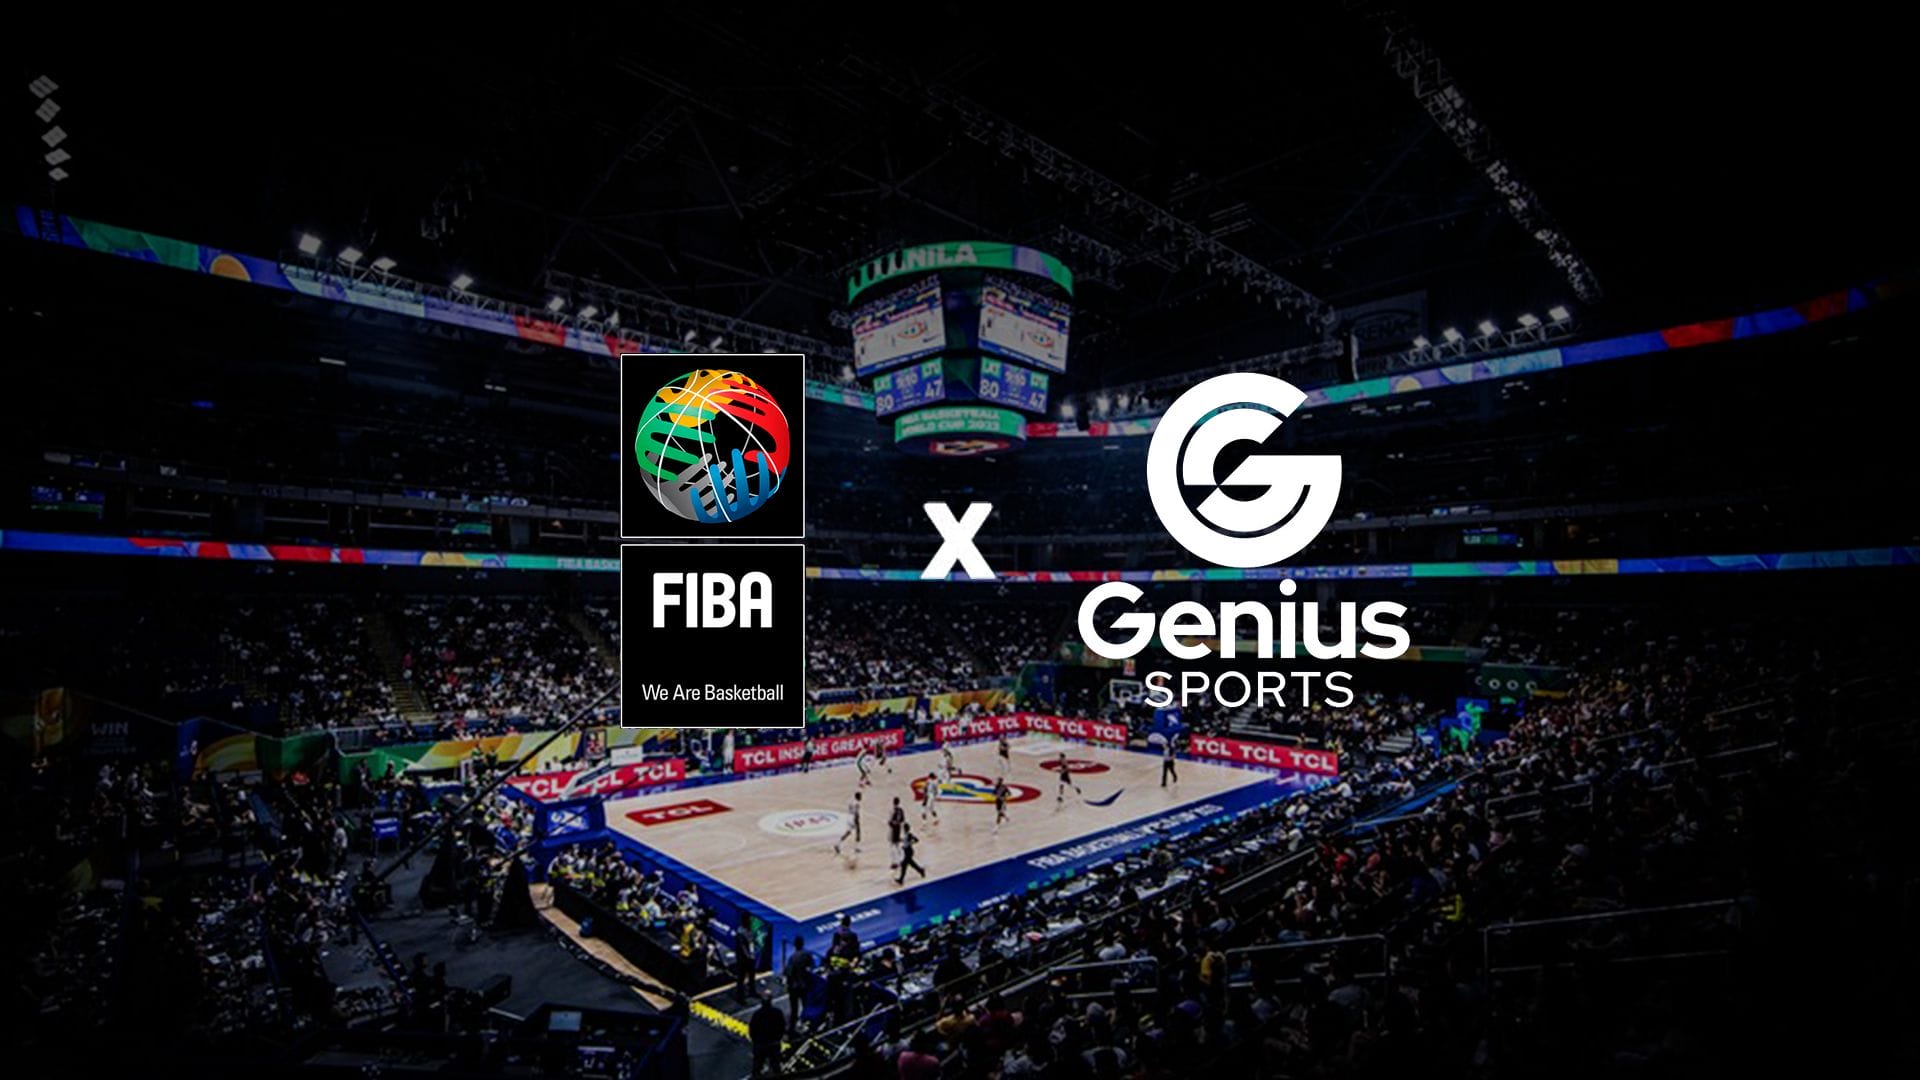 FIBA strategic partnership with Genius Sports to deliver next-gen AI-powered technology for Leagues and National Federations through 2035